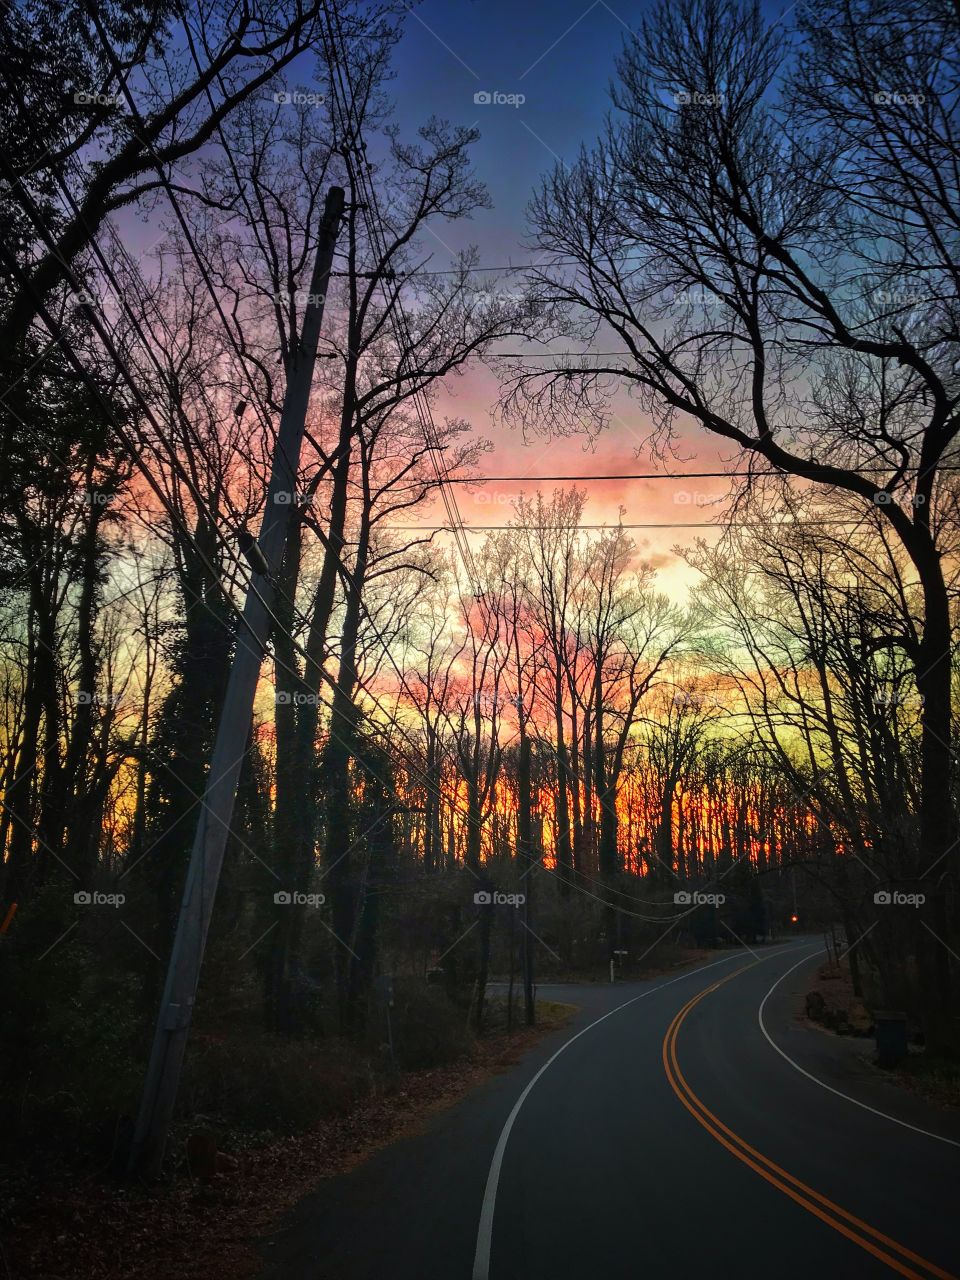 A road into the sunset... December sunset on the US East coast.... winter, dormant trees and clear sky